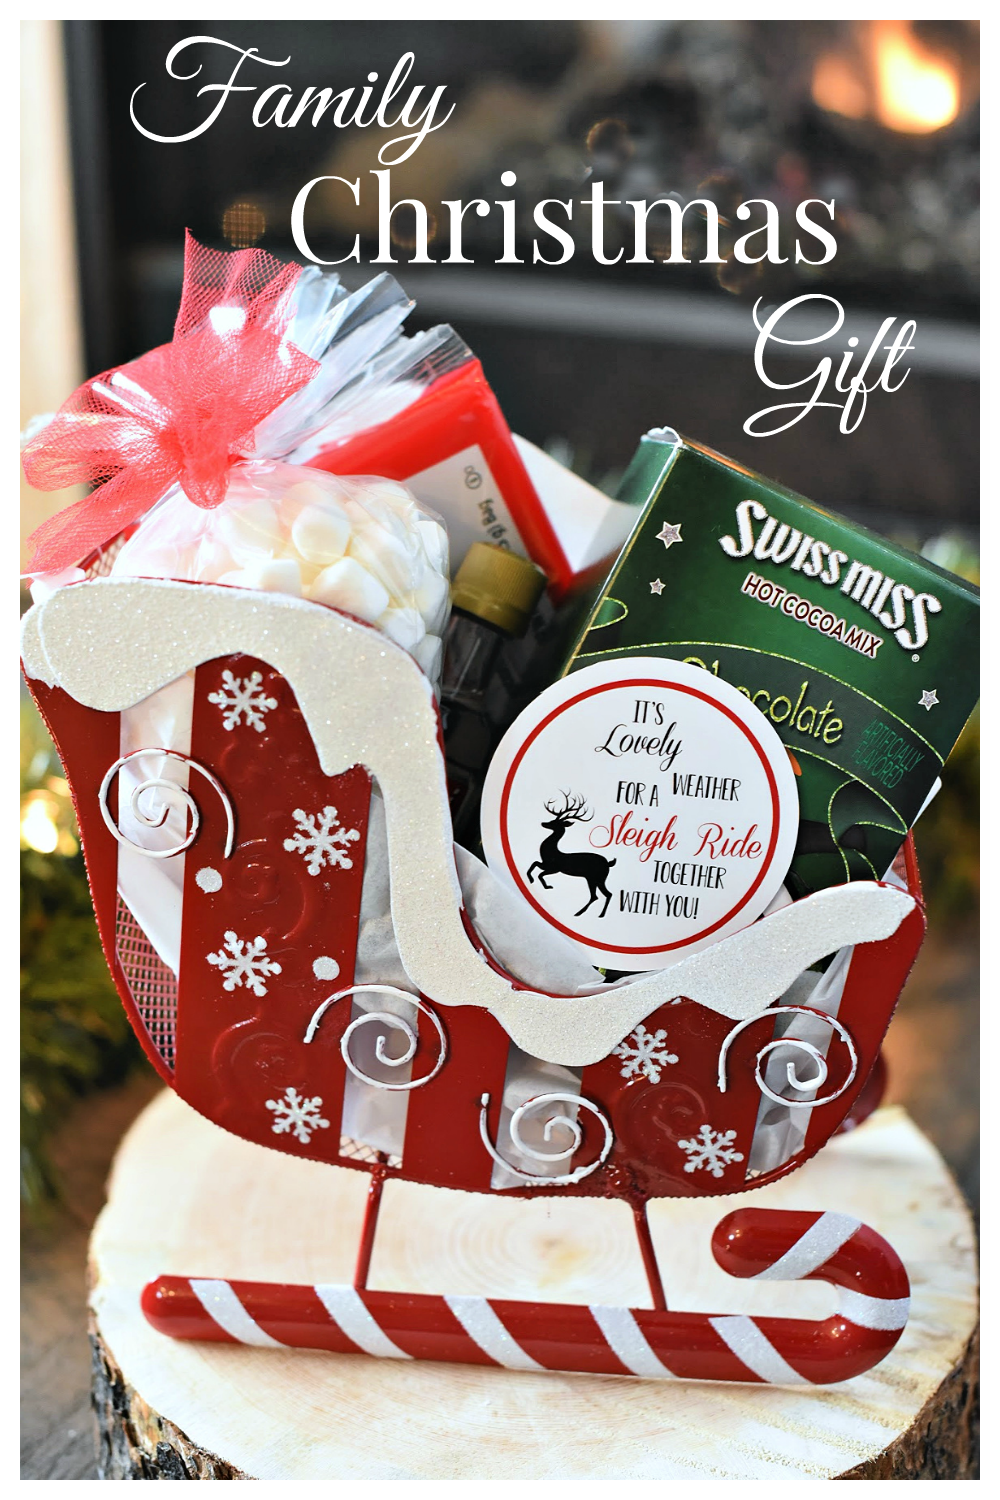 Family Christmas Gift! This sleigh ride Christmas gift is perfect for any family. It's such a simple and easy gift to put together, any family will love it! #gifts #Christmasgift #simplegift #fungiftidea